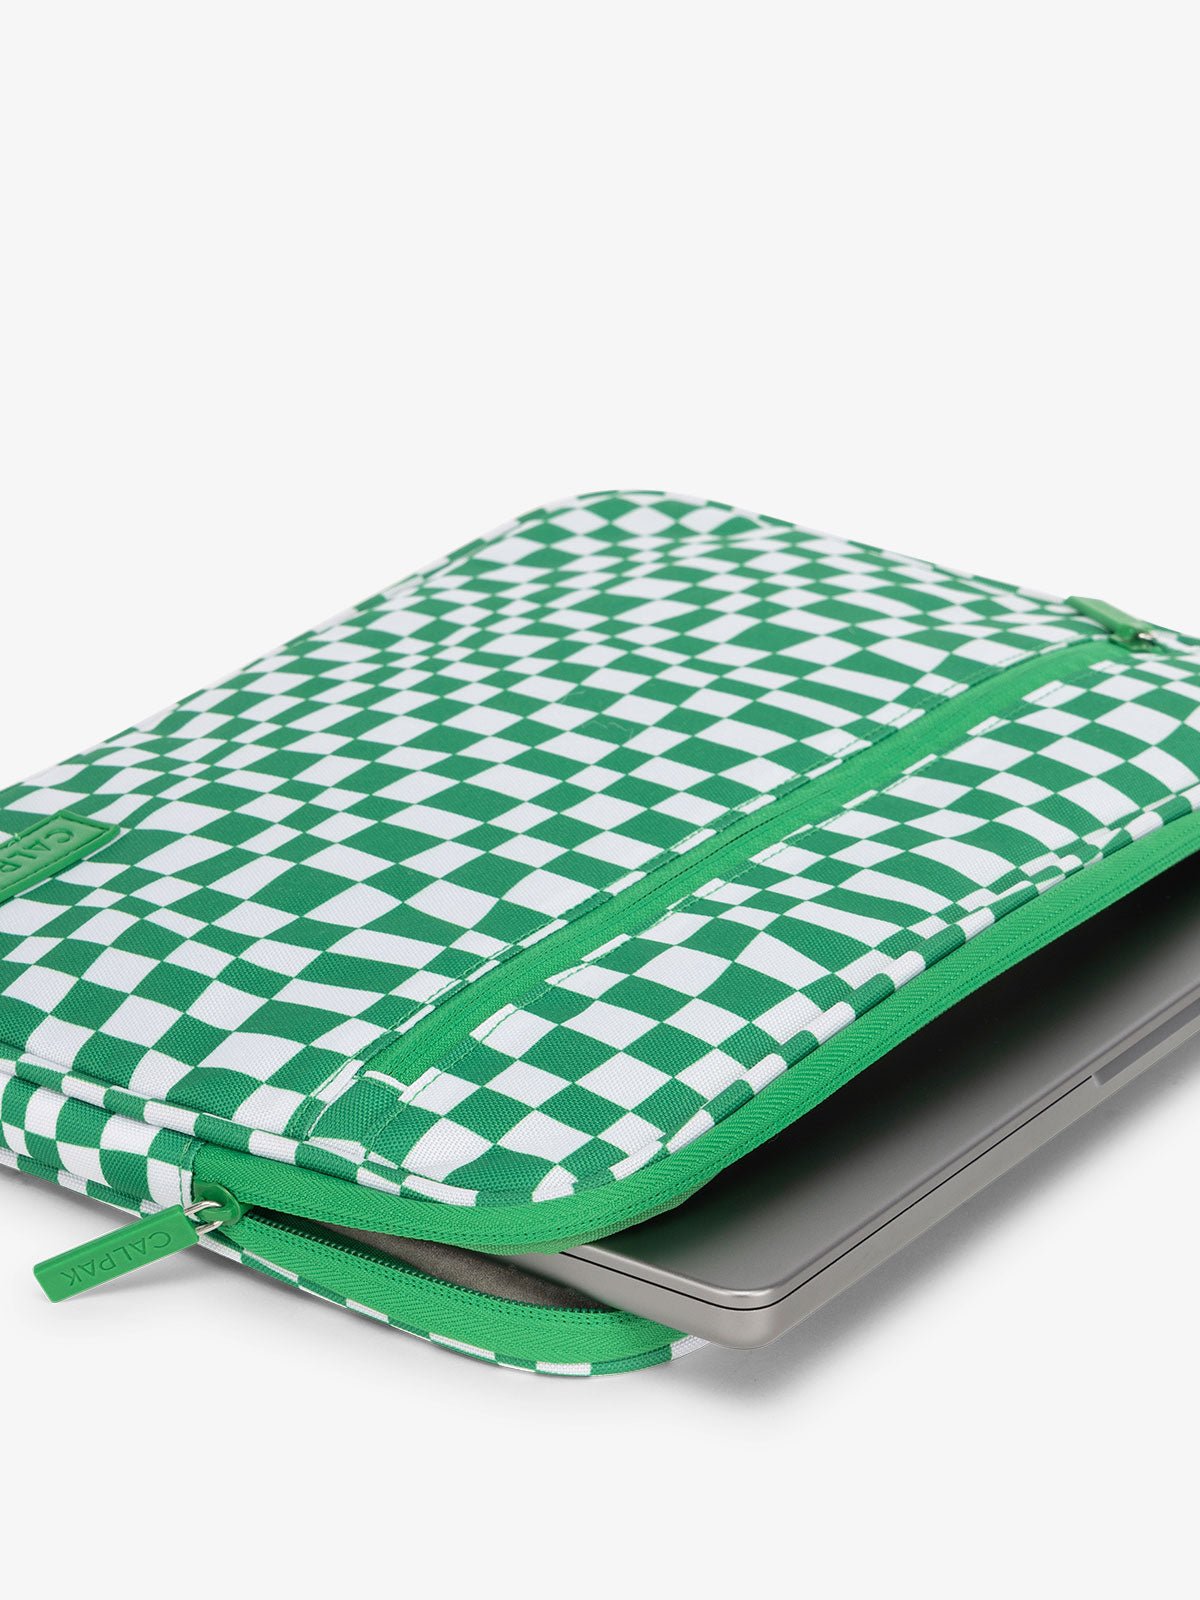 CALPAK 15-17 Inch Padded Laptop case water resistant in green and white checker print